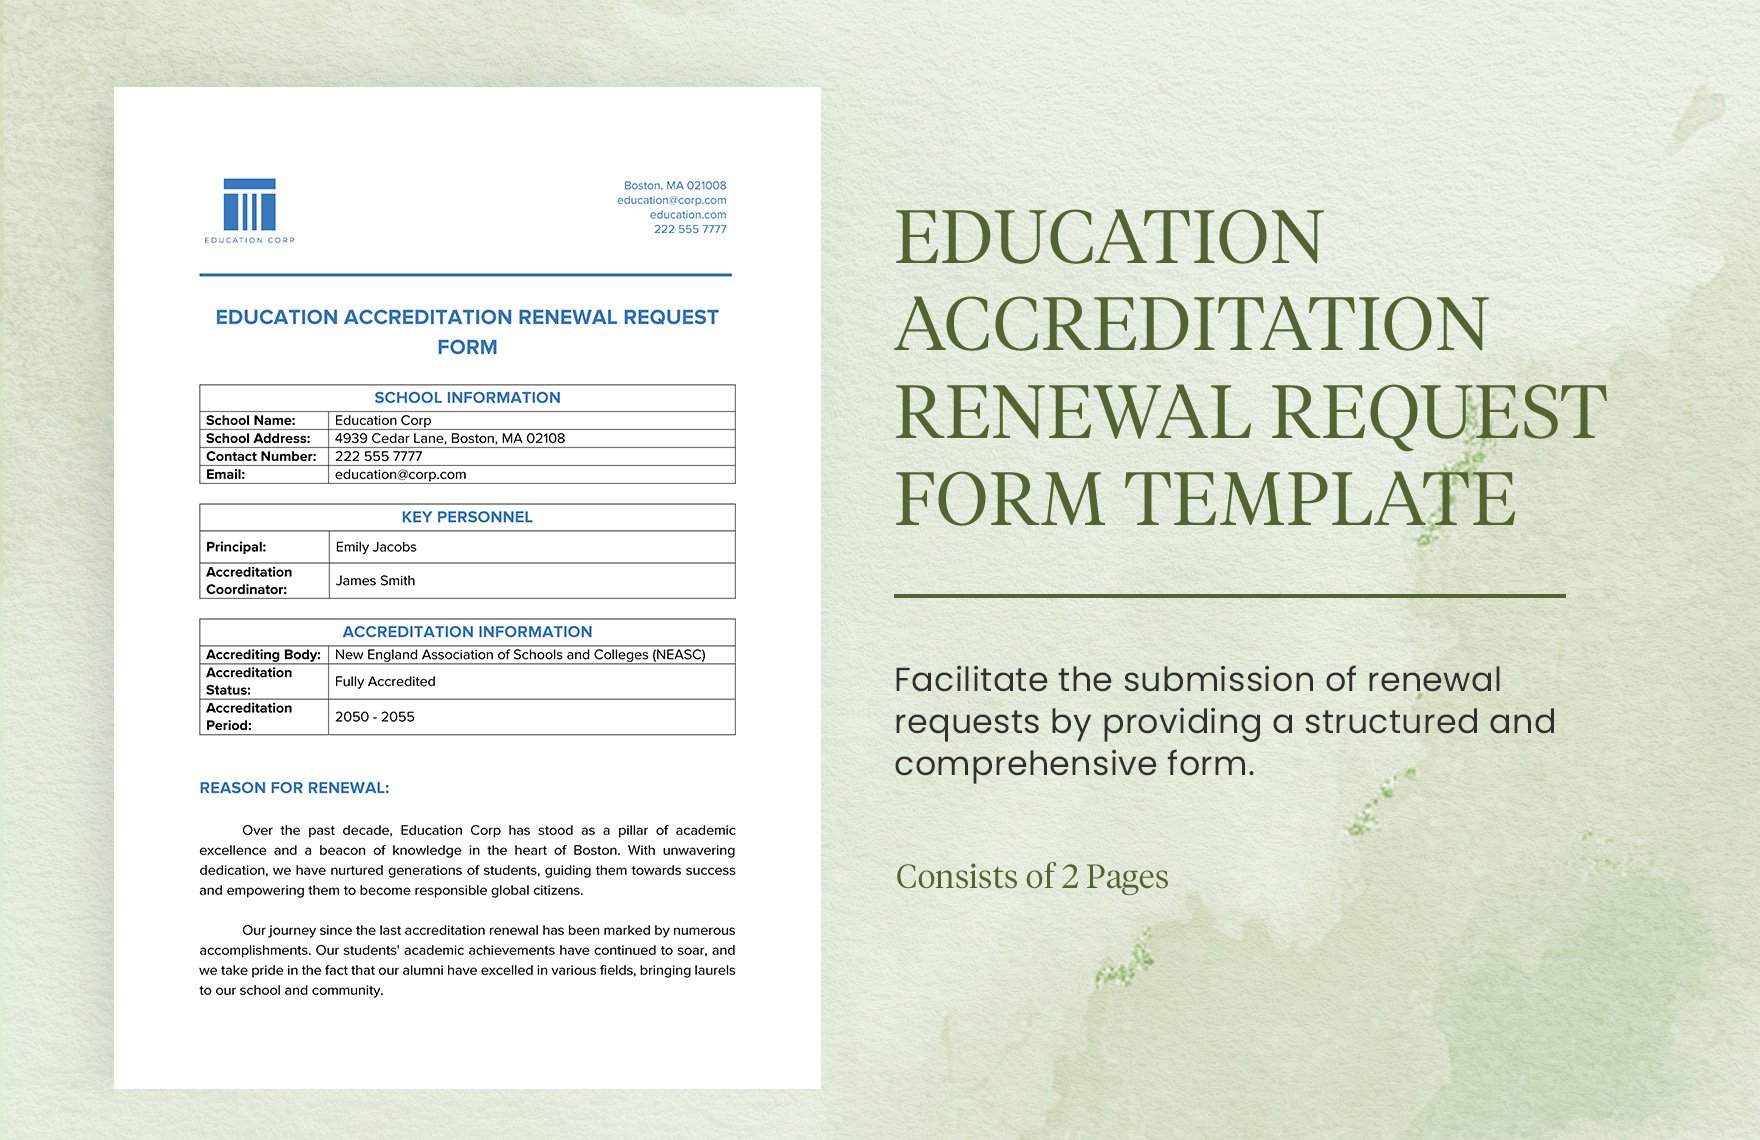 Education Accreditation Renewal Request Form Template in Word, Google Docs, PDF